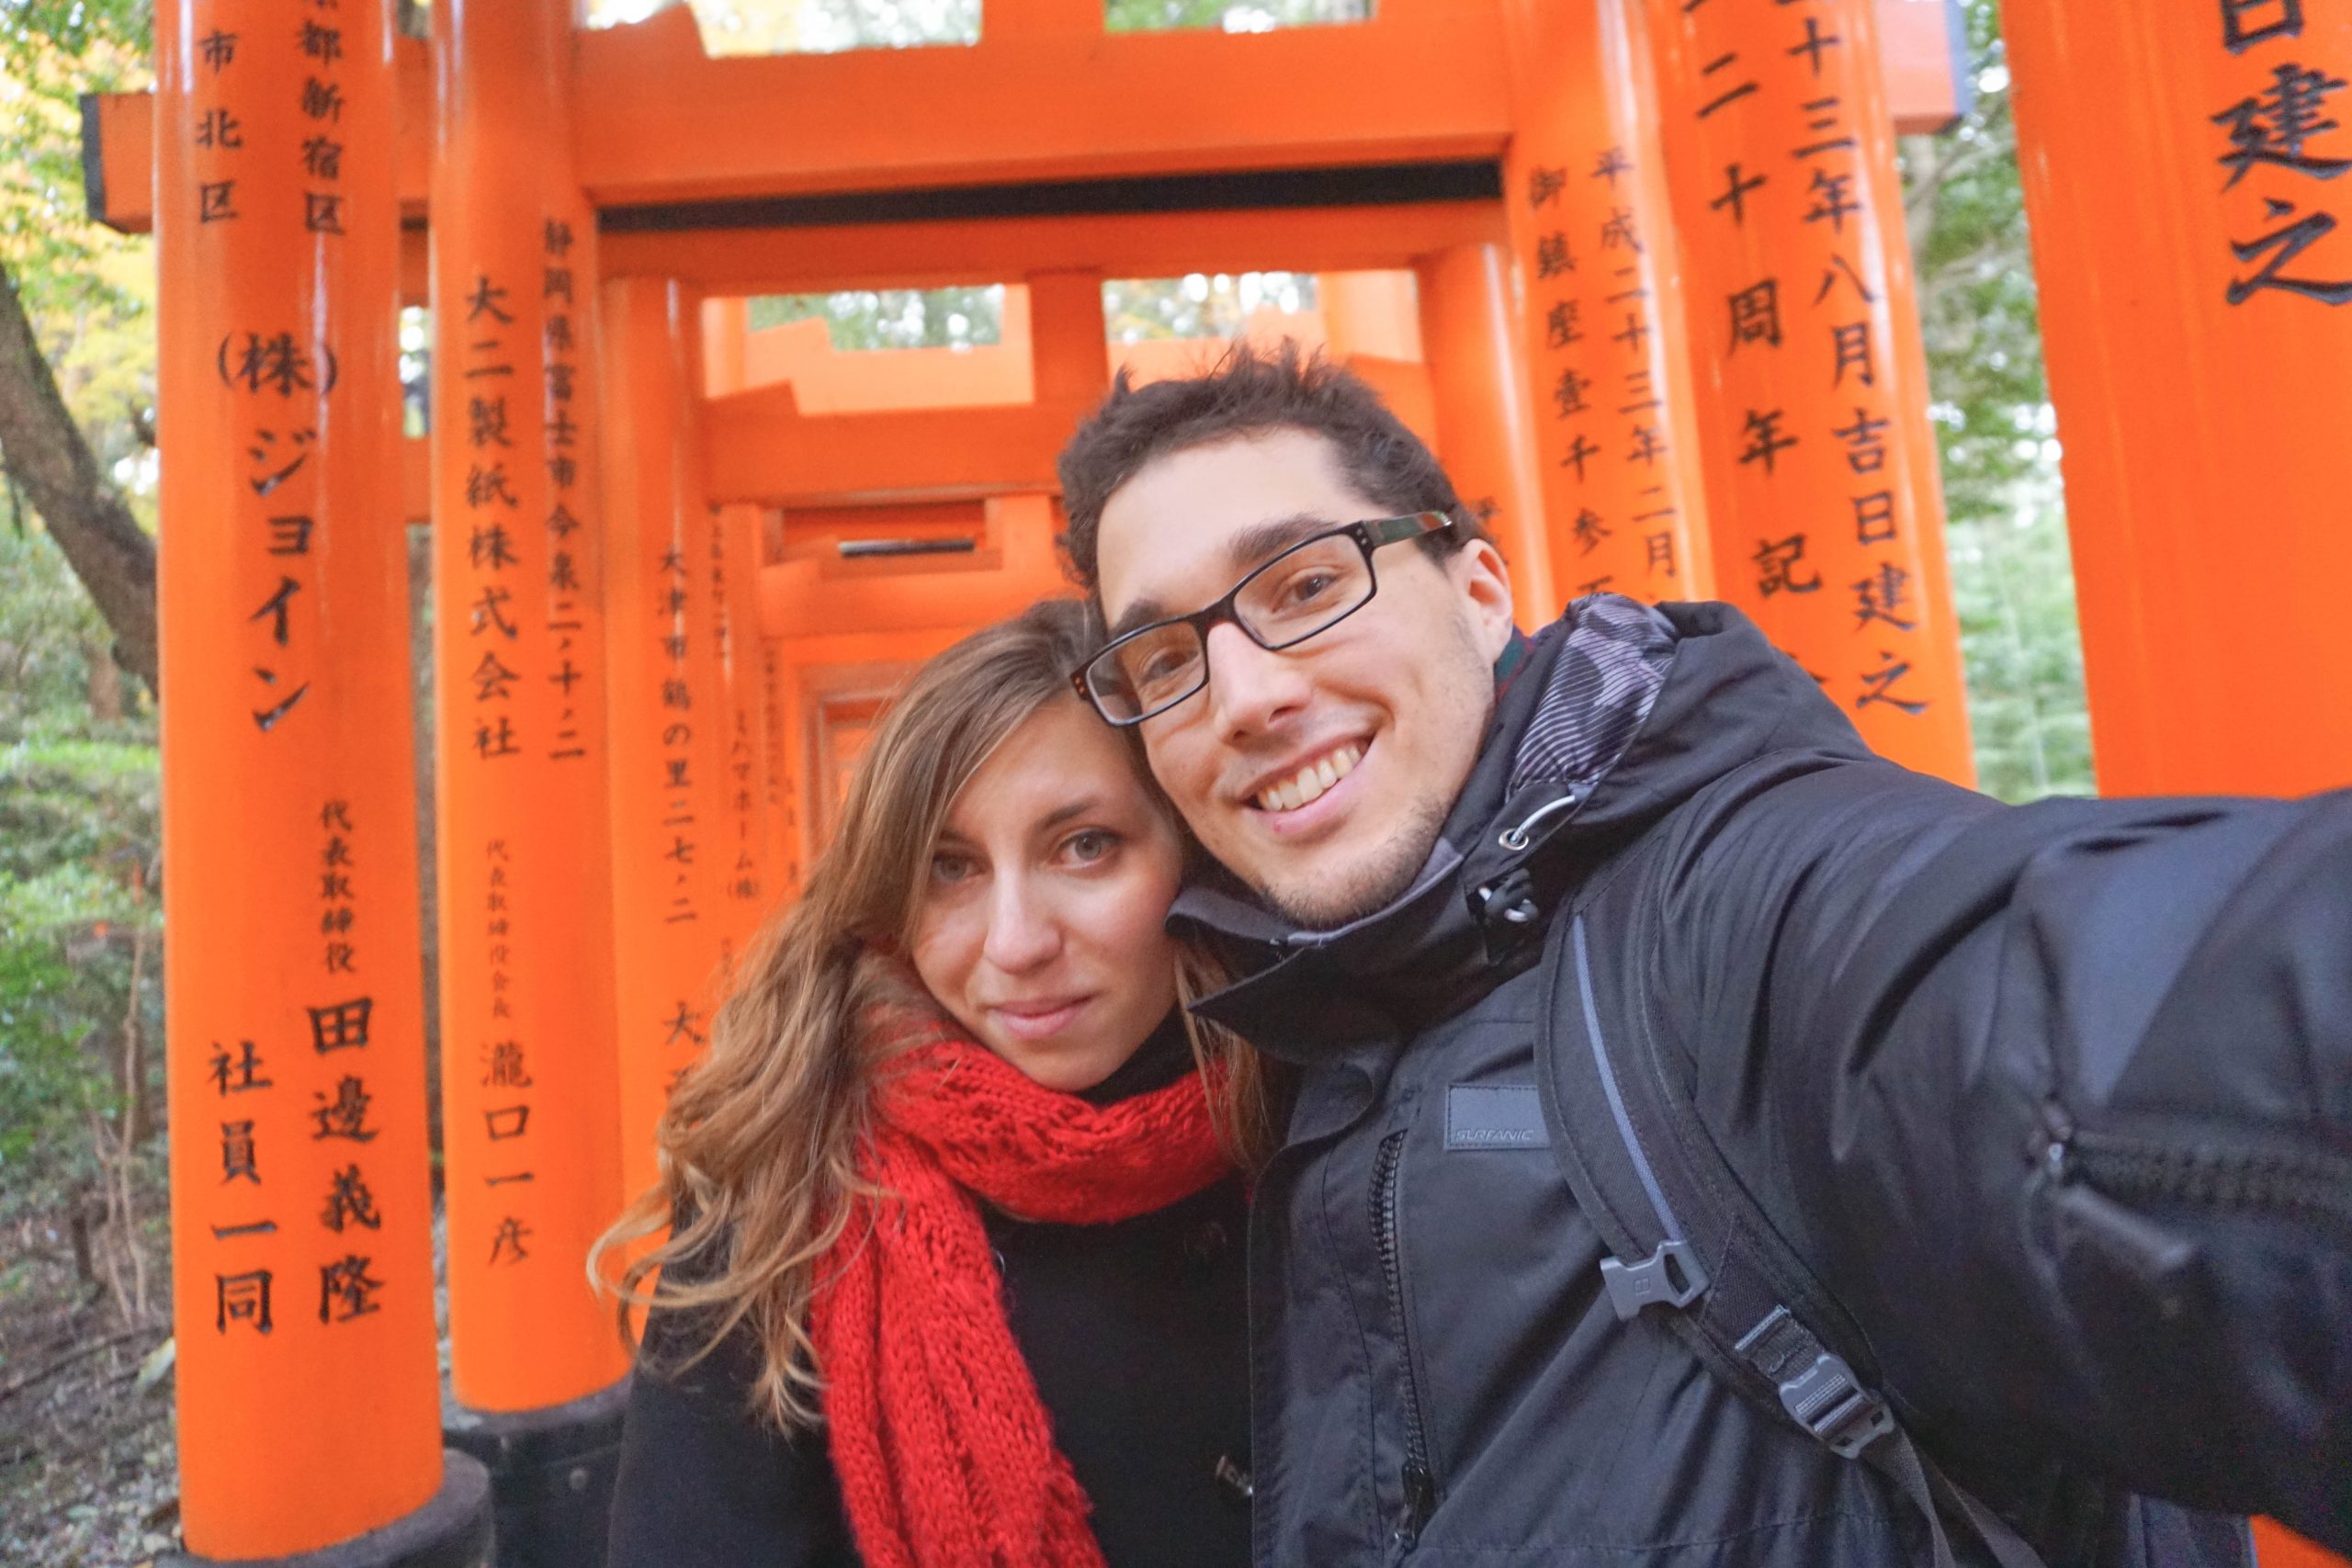 Our our first visit to Japan we hiked the Fushimi Inari Shrine Trail at sunset